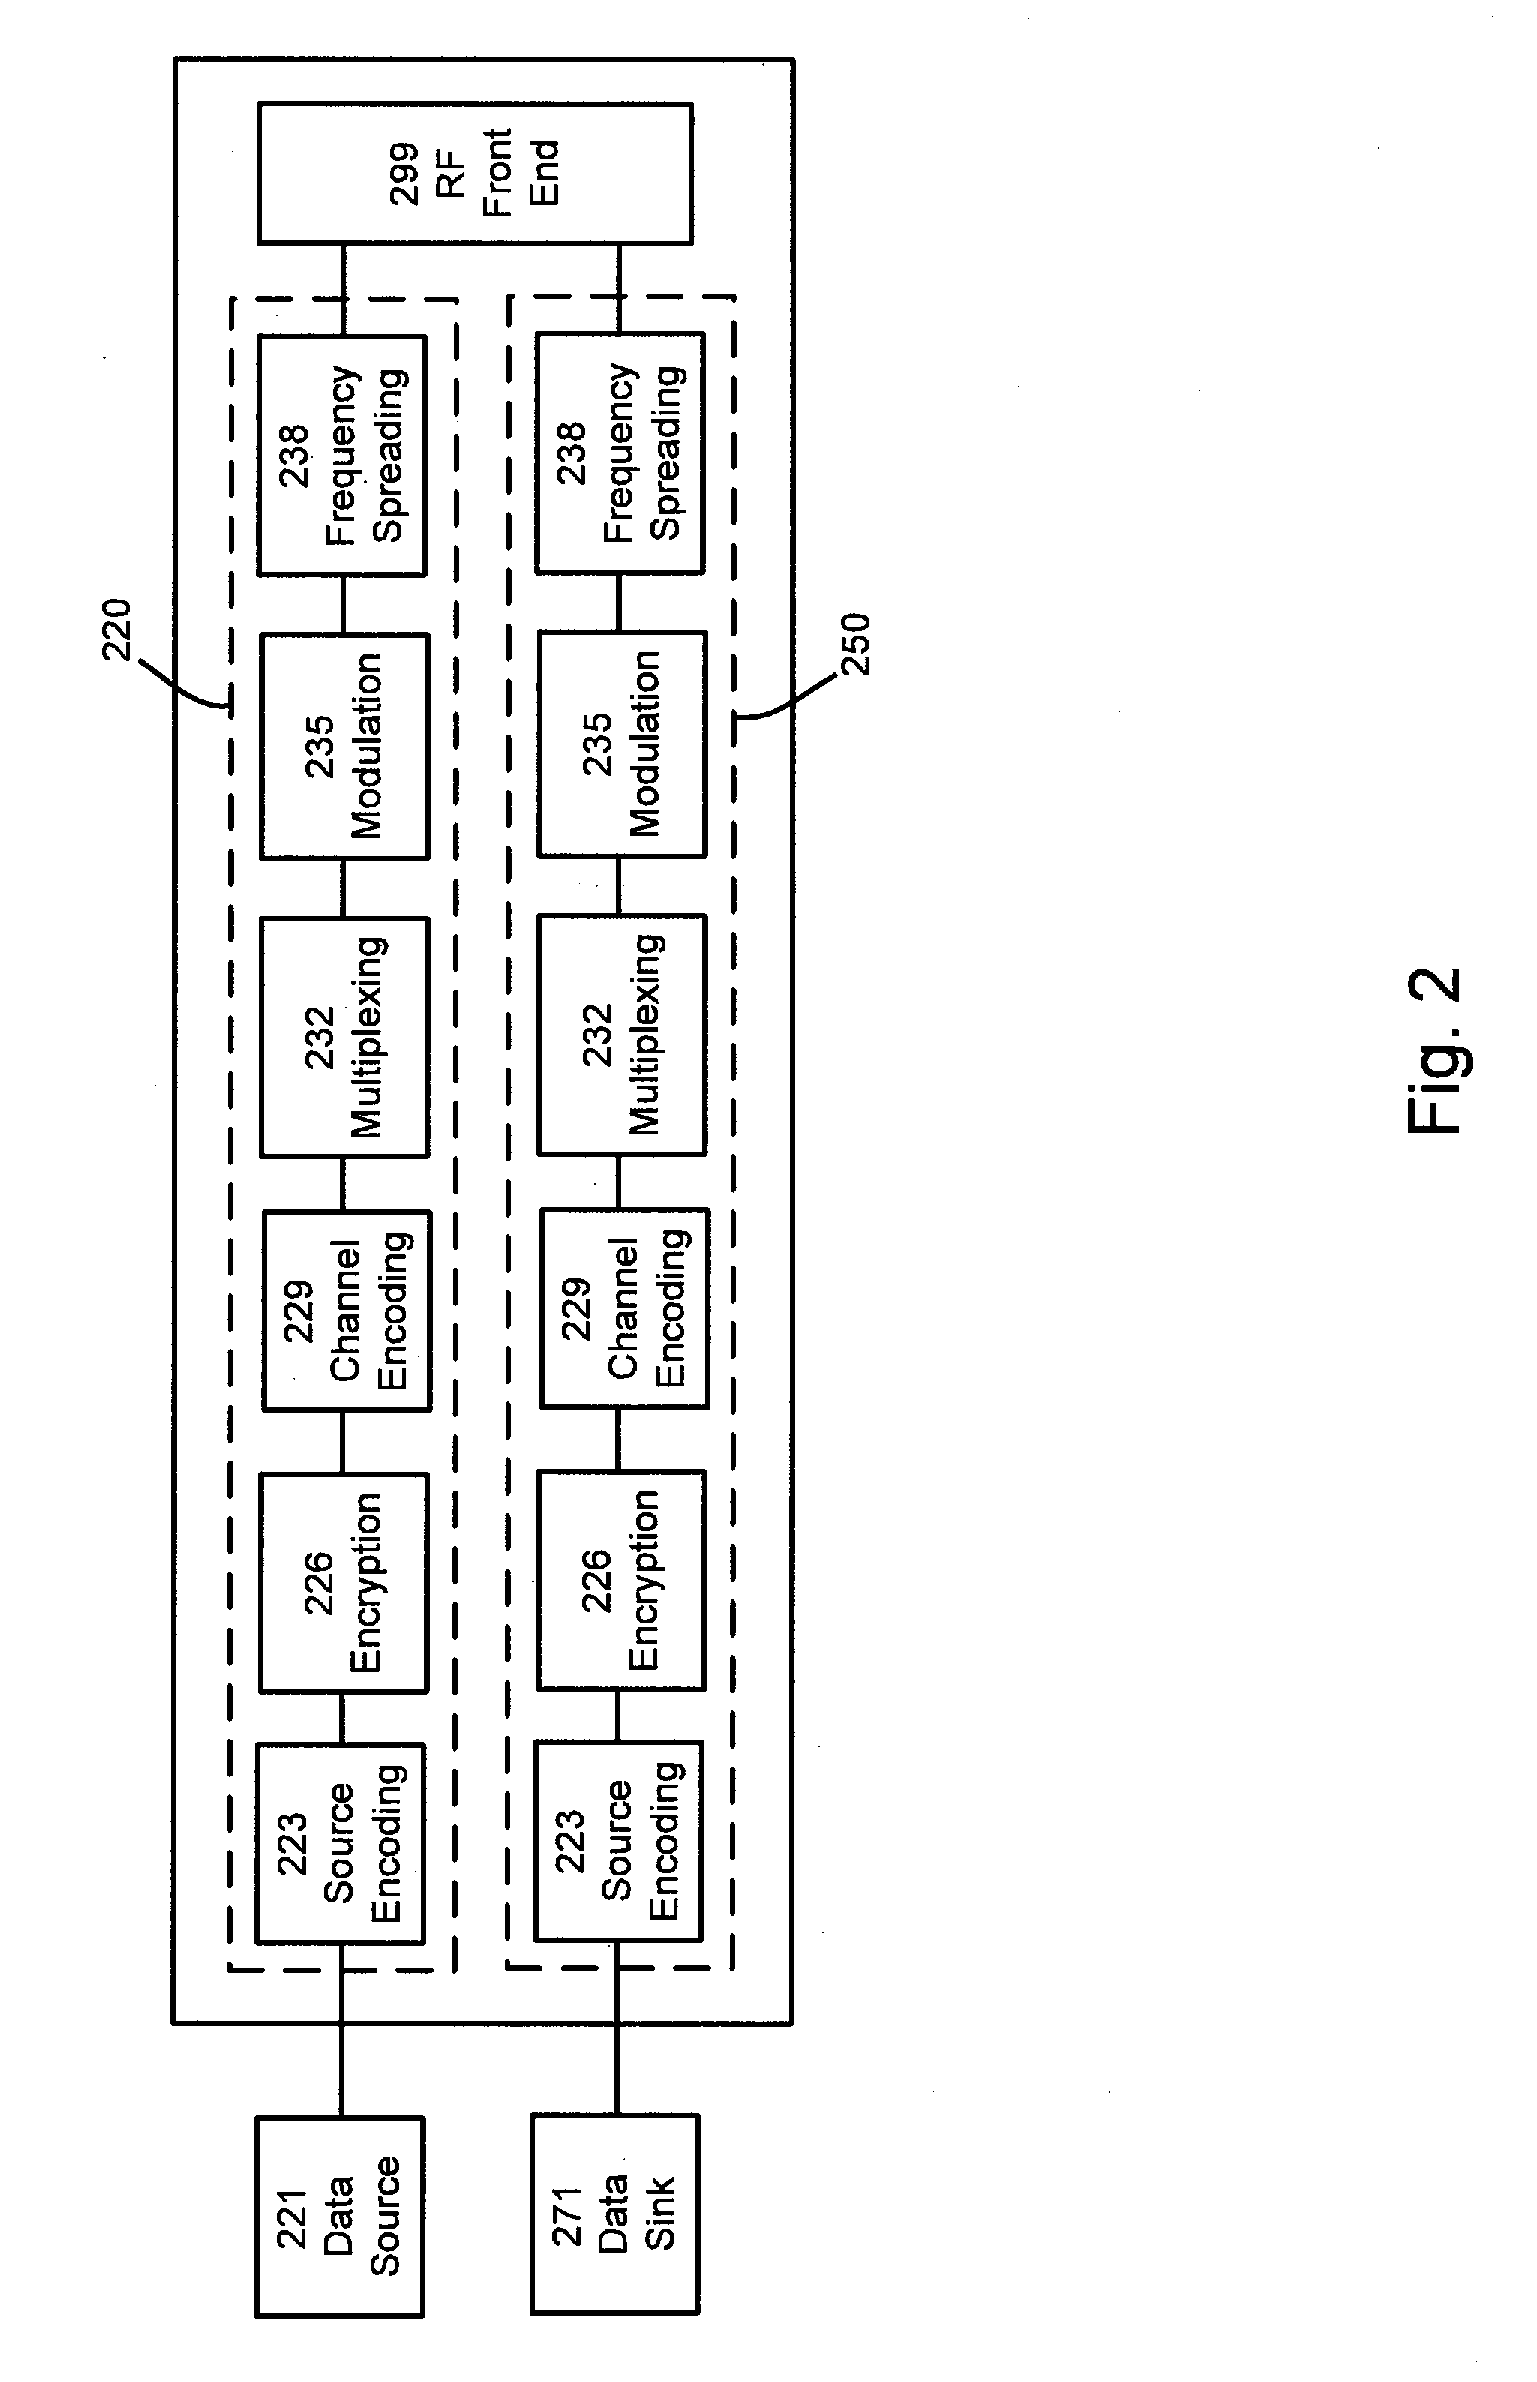 Encoded information reading terminal with user-configurable multi-protocol wireless communication interface